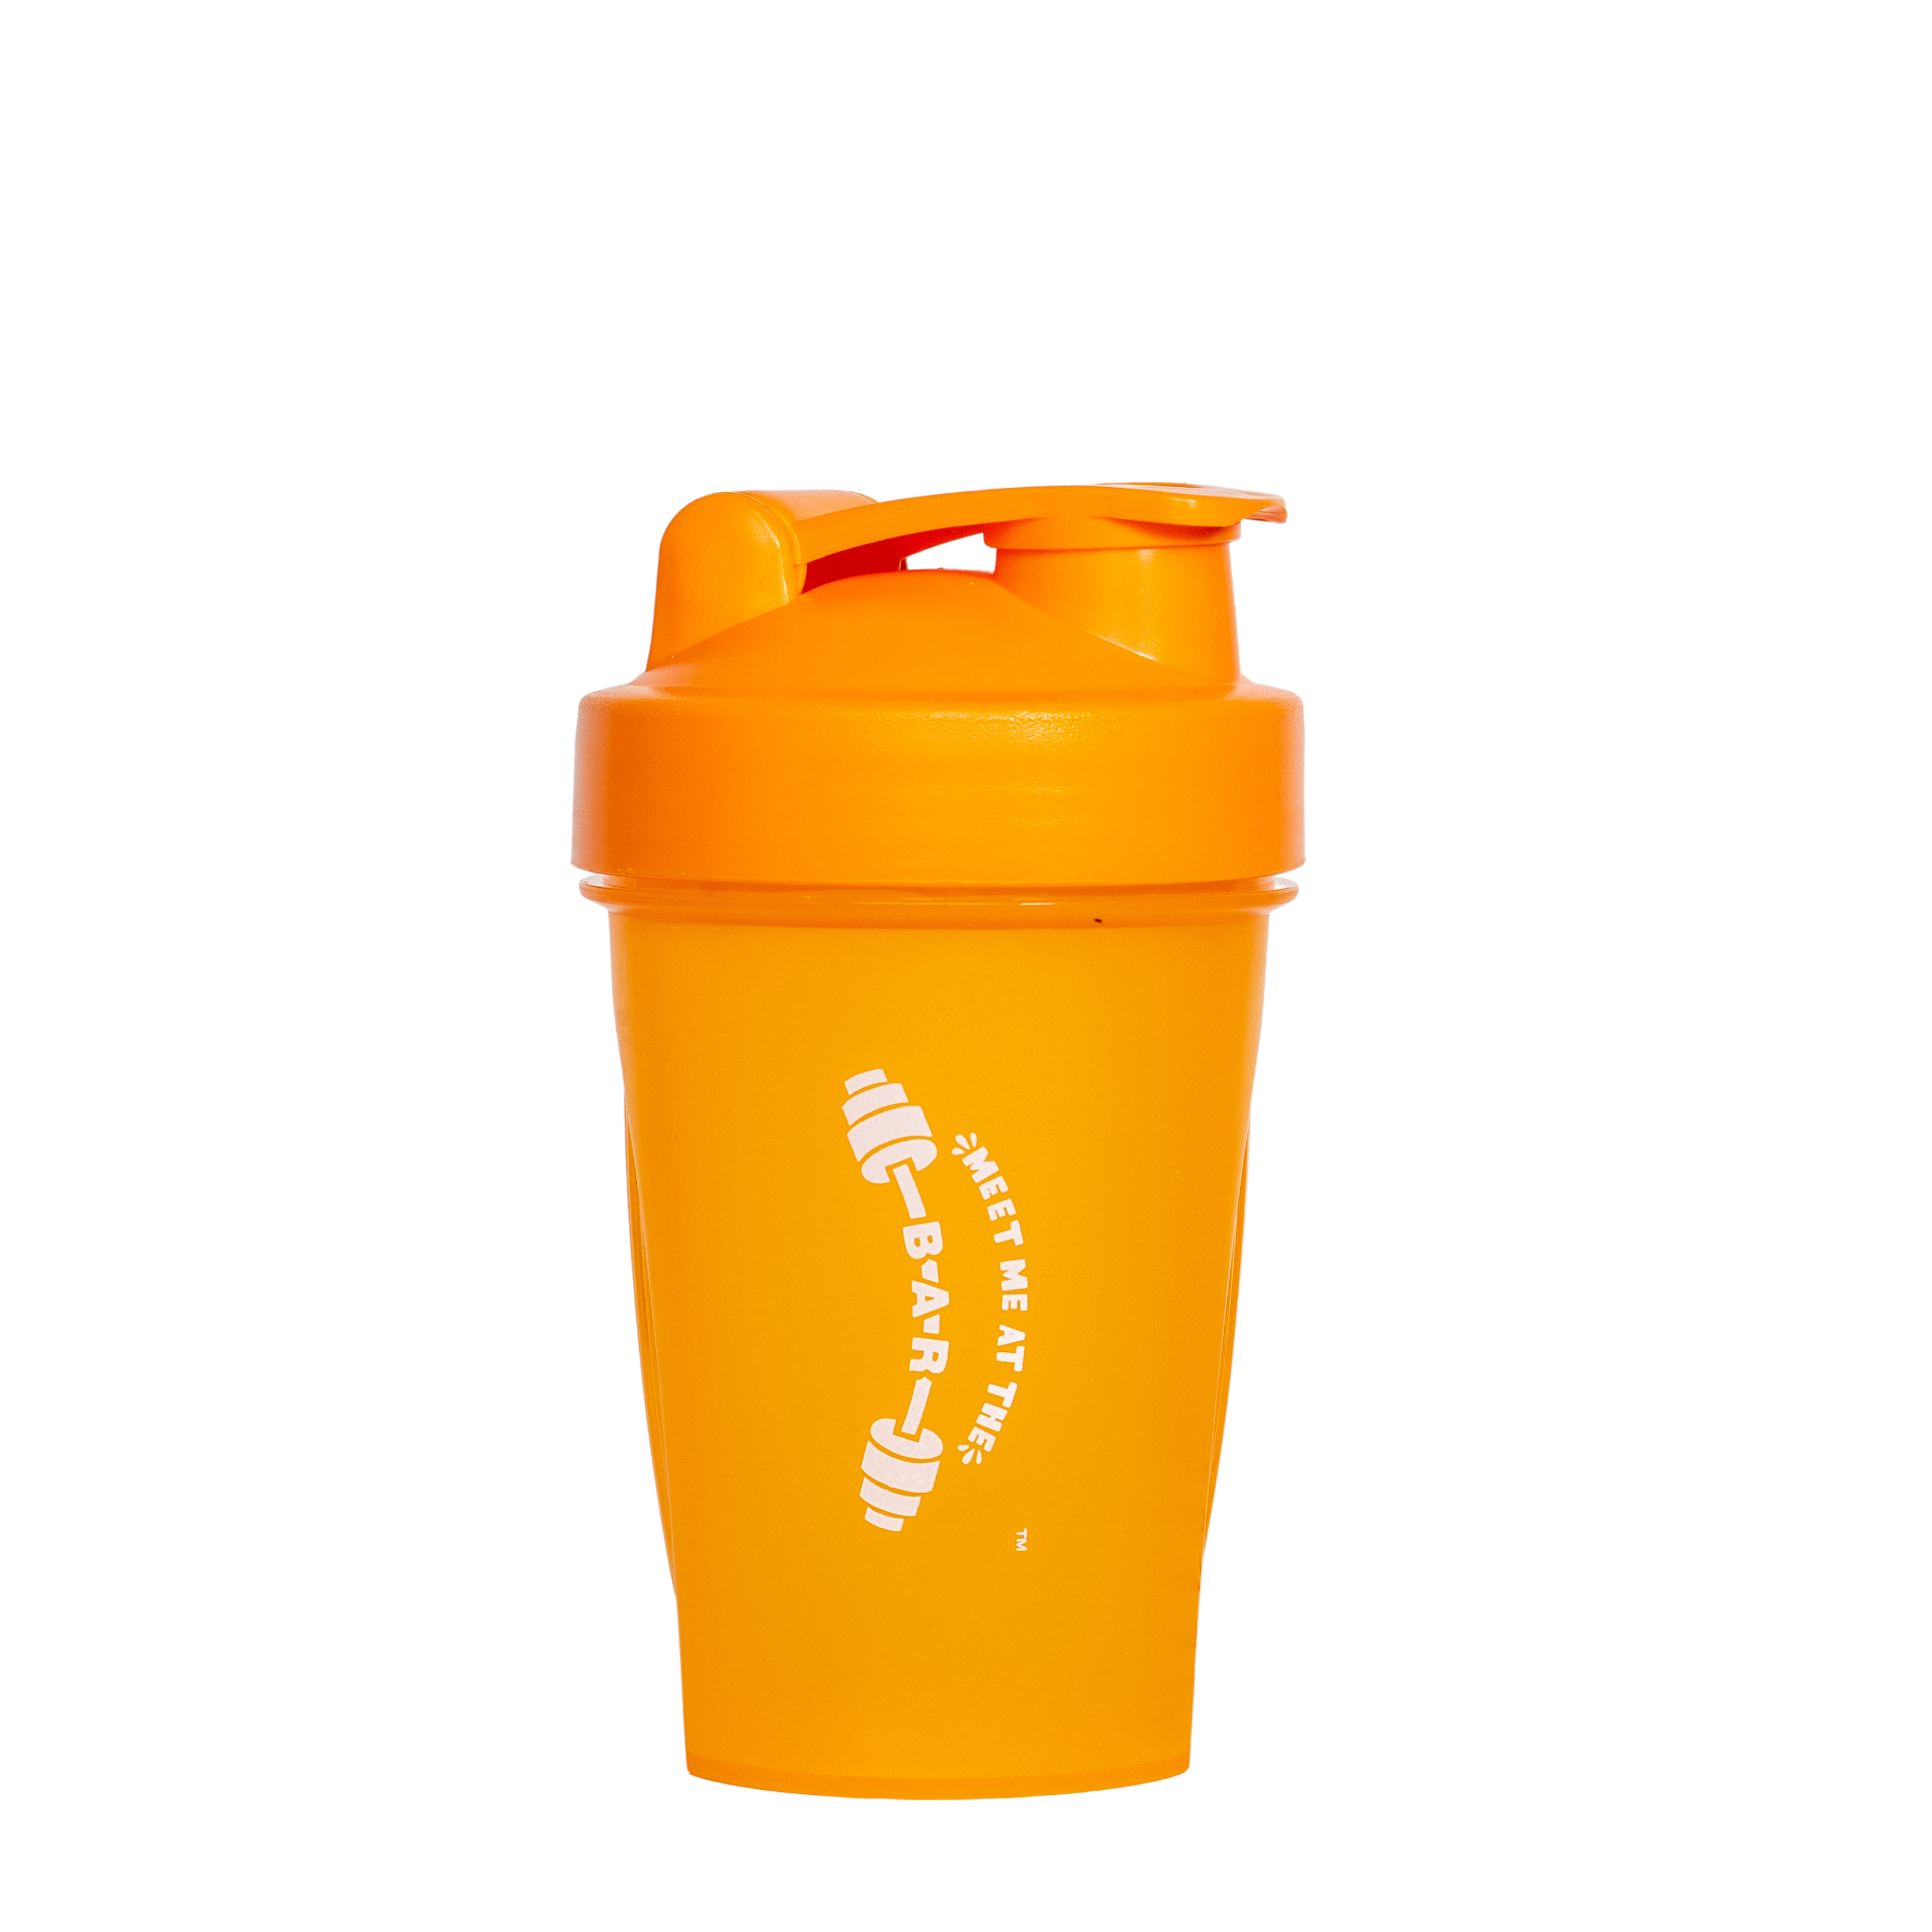 NutriFit Plus Sport Protein Blender Shaker Bottle12oz Multi Color BPA Free Leak Proof with an Innovative Stainless Mixer